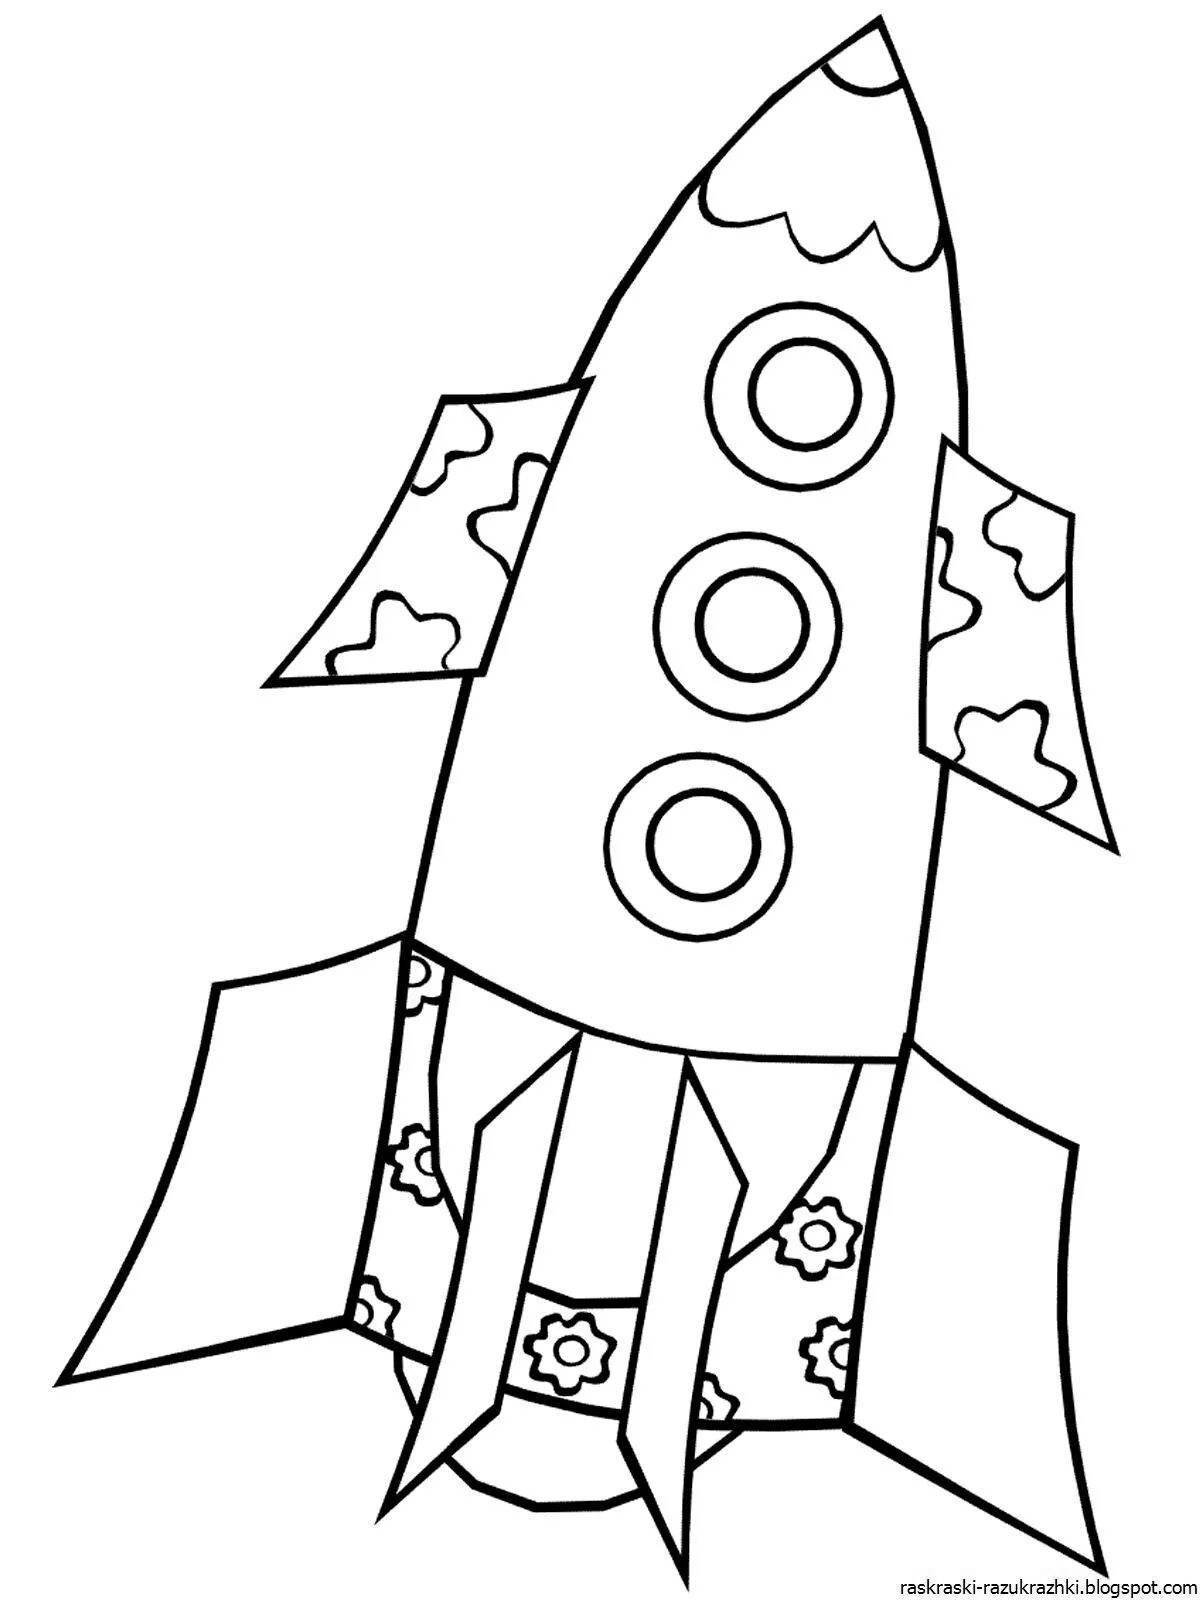 Creative rocket coloring book for 4-5 year olds